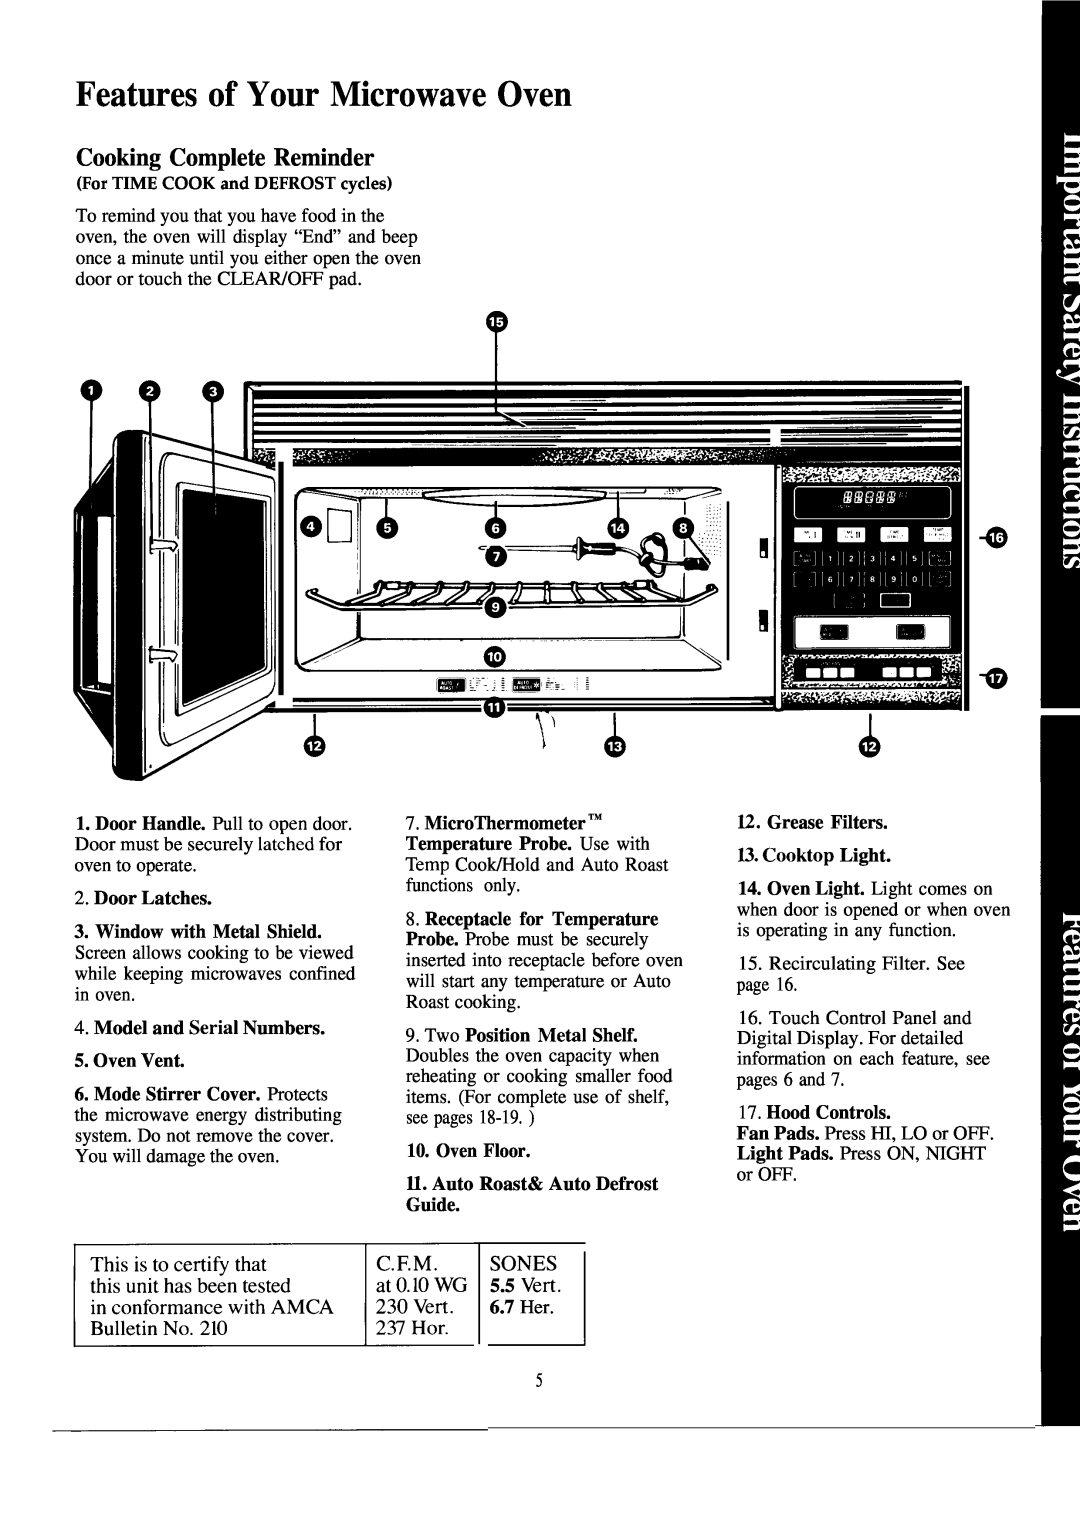 GE JVM141H warranty Features of Your Microwave Oven, Cooking Complete Reminder 